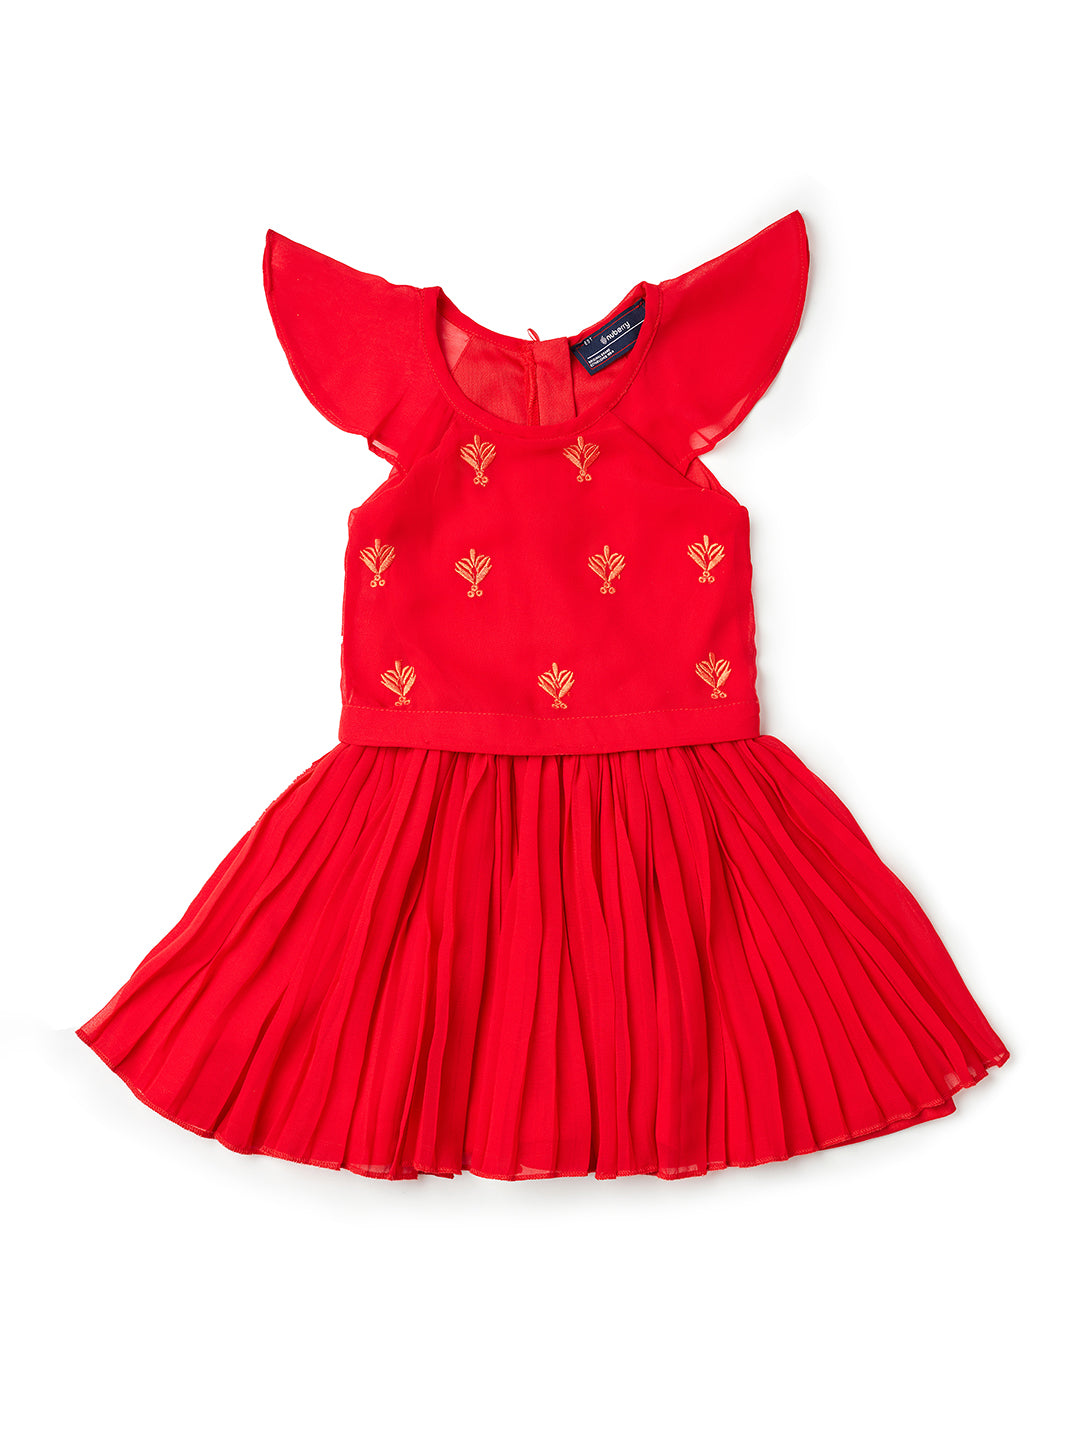 Nuberry Girl Frock Dress - Red with Cap Sleeve